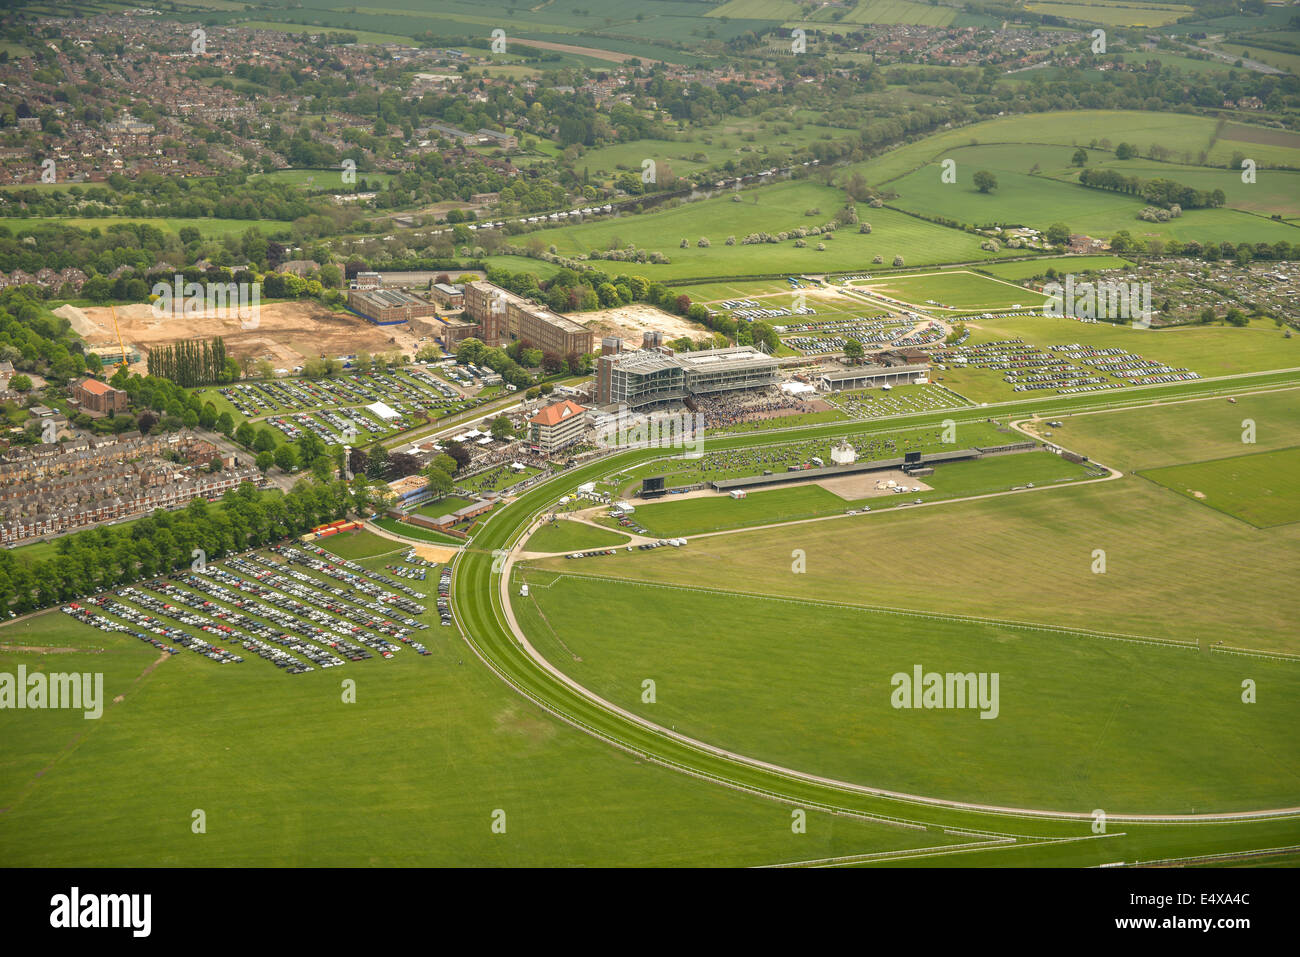 An aerial view of a race meeting at York Racecourse Stock Photo